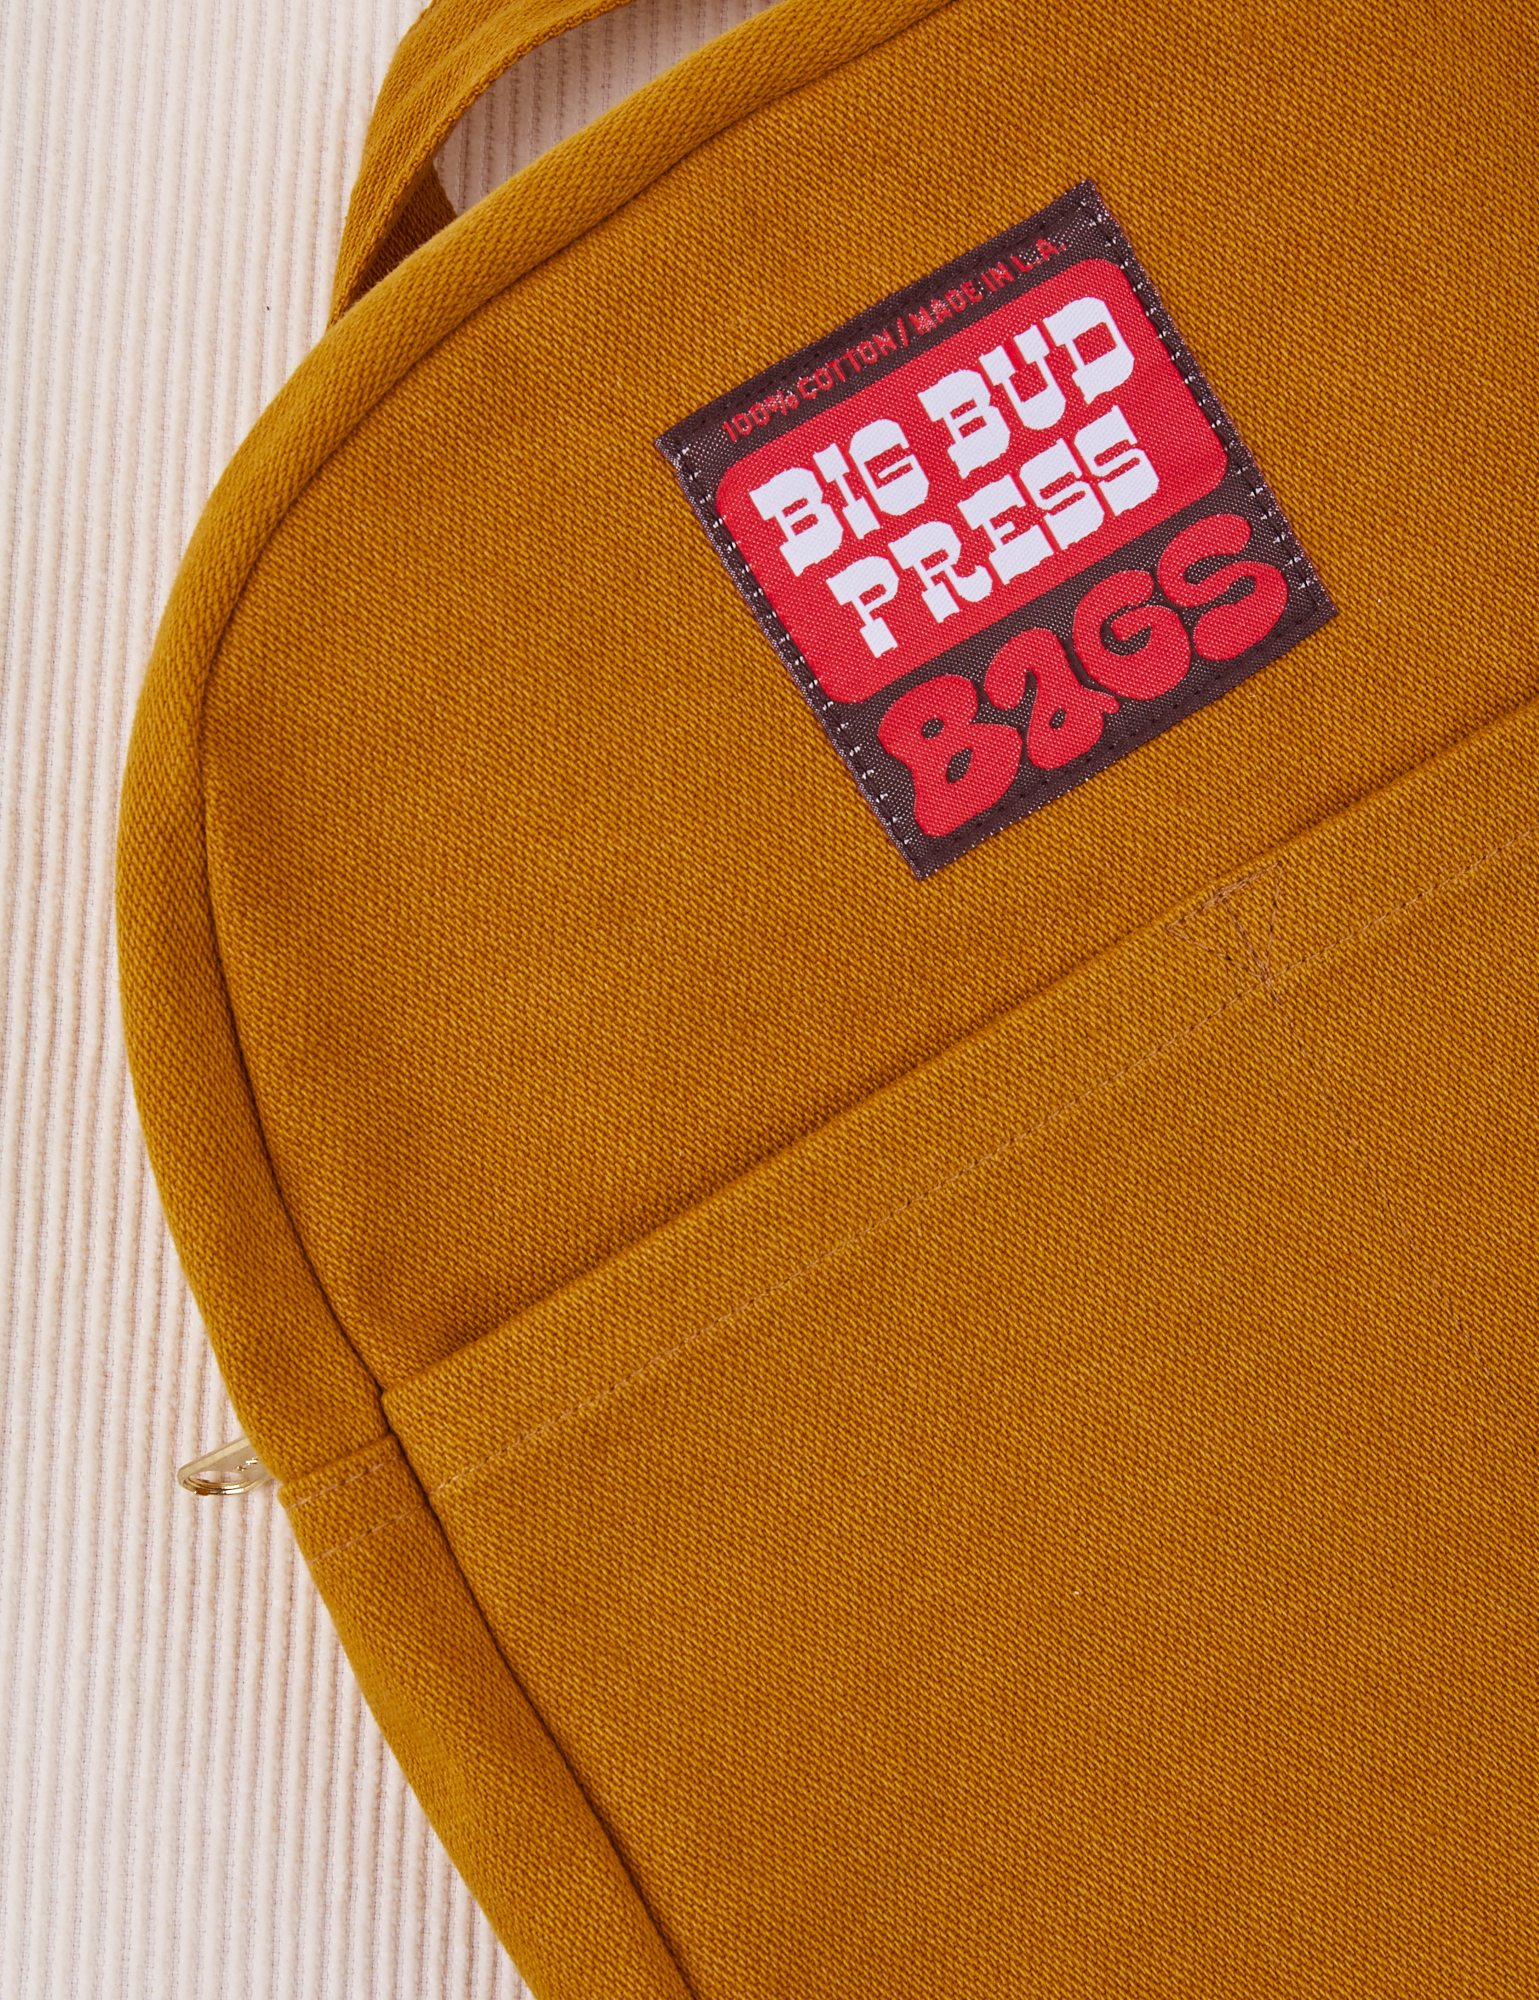 Mini Backpack in Spicy Mustard with brown and red Big Bud Press label